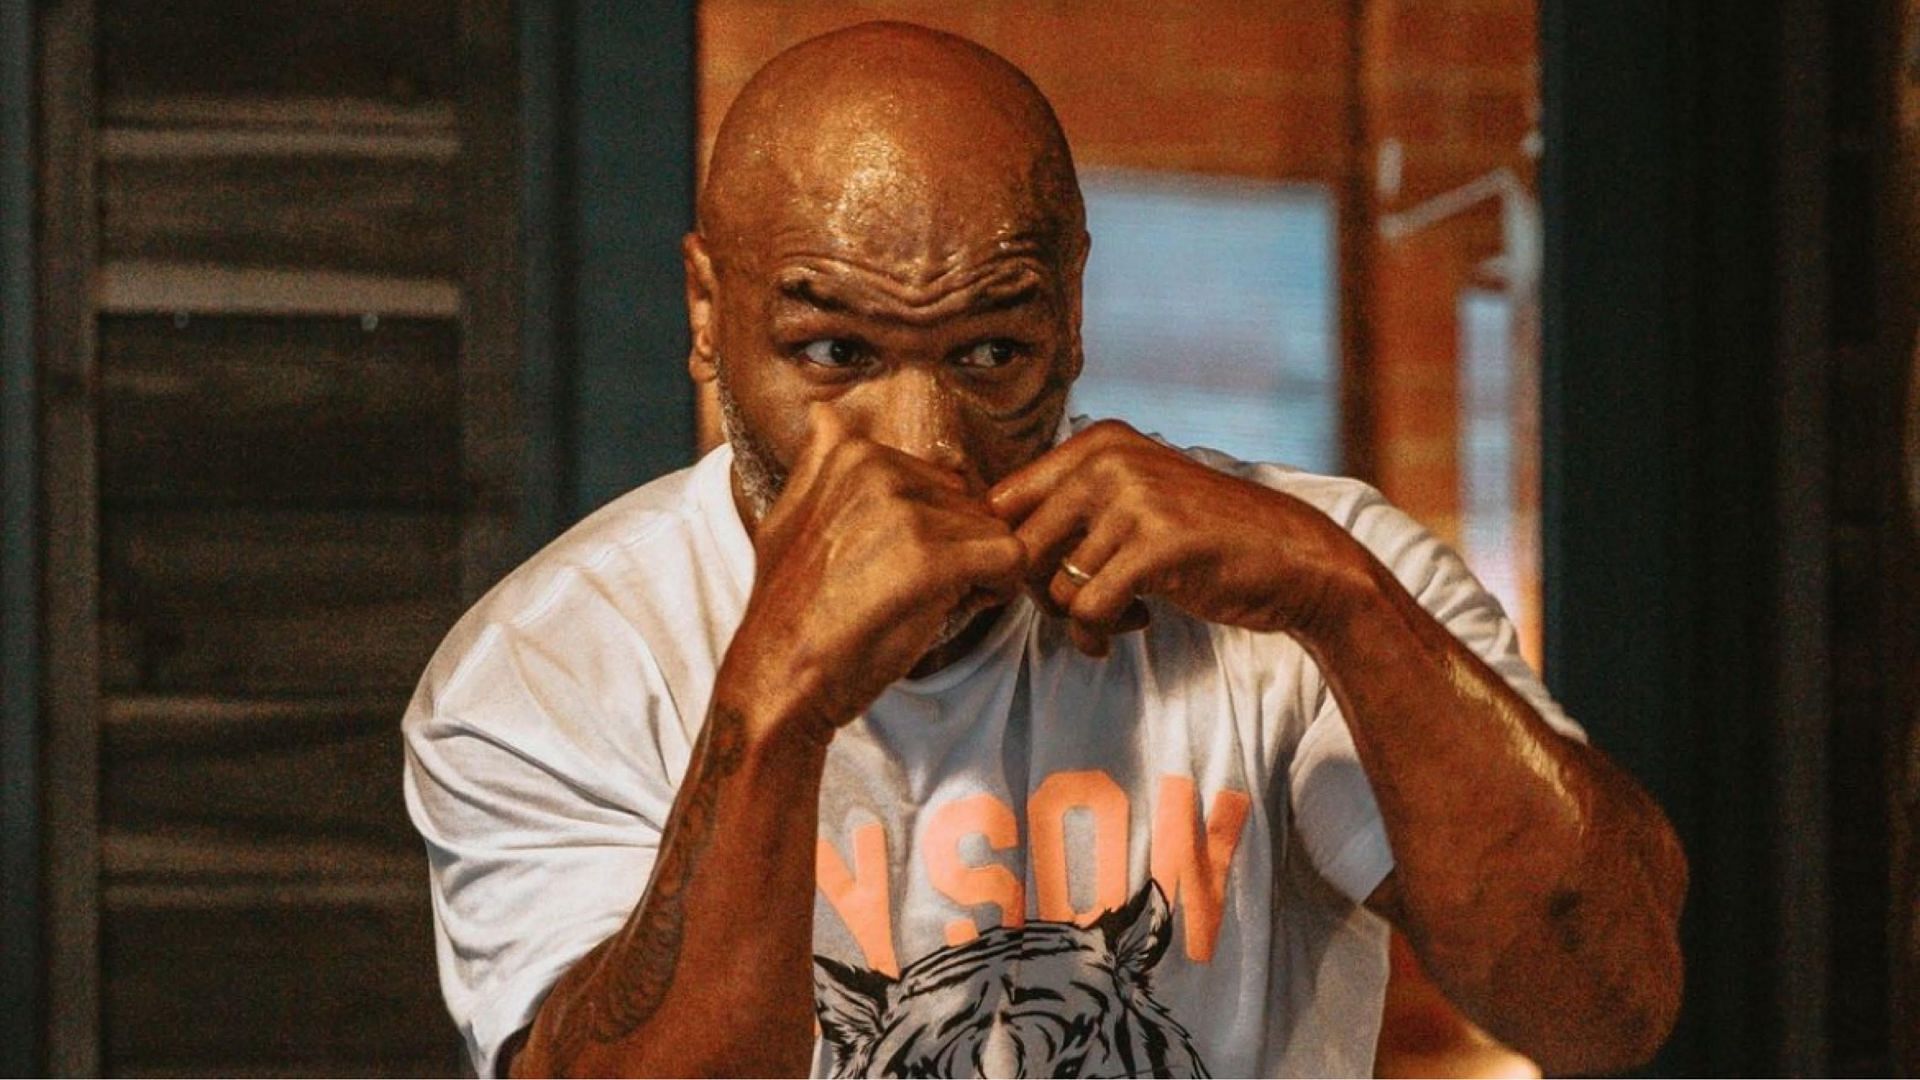 Mike Tyson [image courtesy of Instagram, @miketyson]